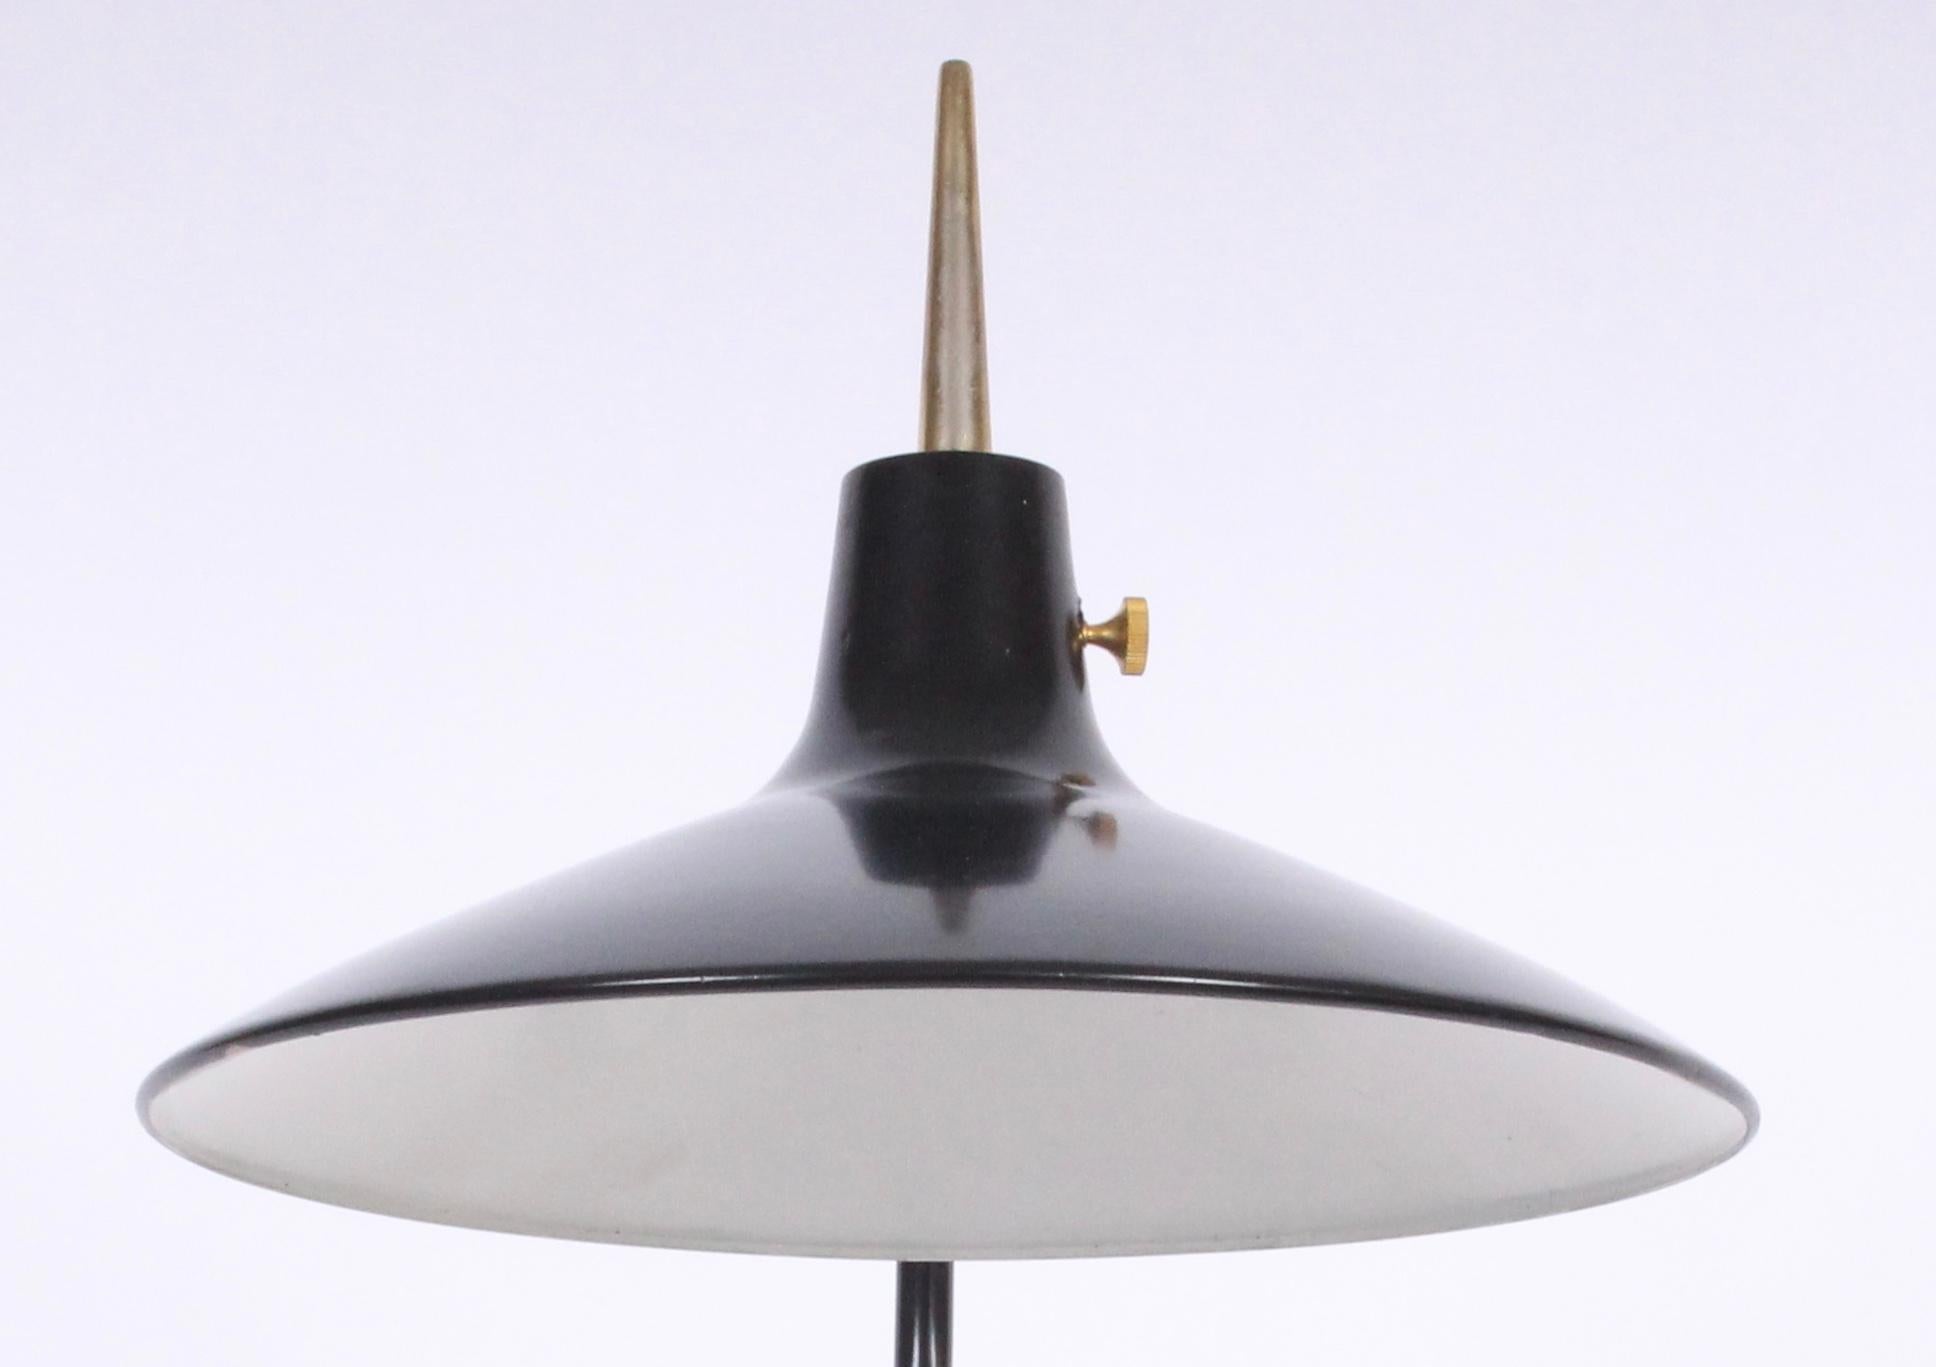 20th Century Gio Ponti for Laurel Lamp Co. Black and Brass Desk Lamp with Black Enamel Shade